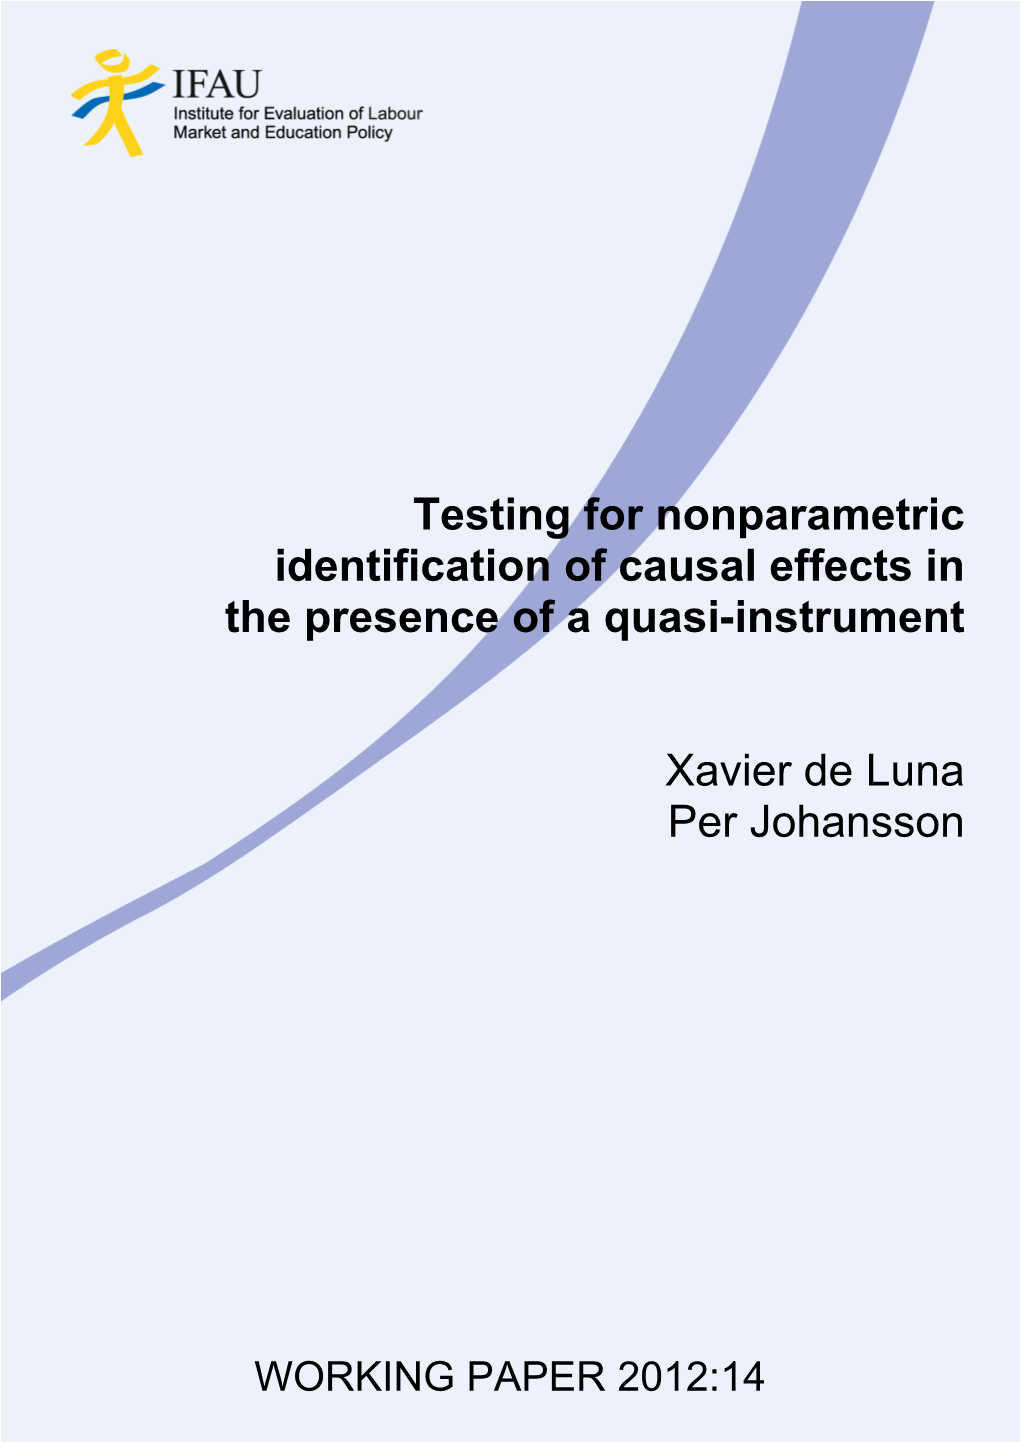 Testing for a Nonparametric Identification of Causal Effects in The